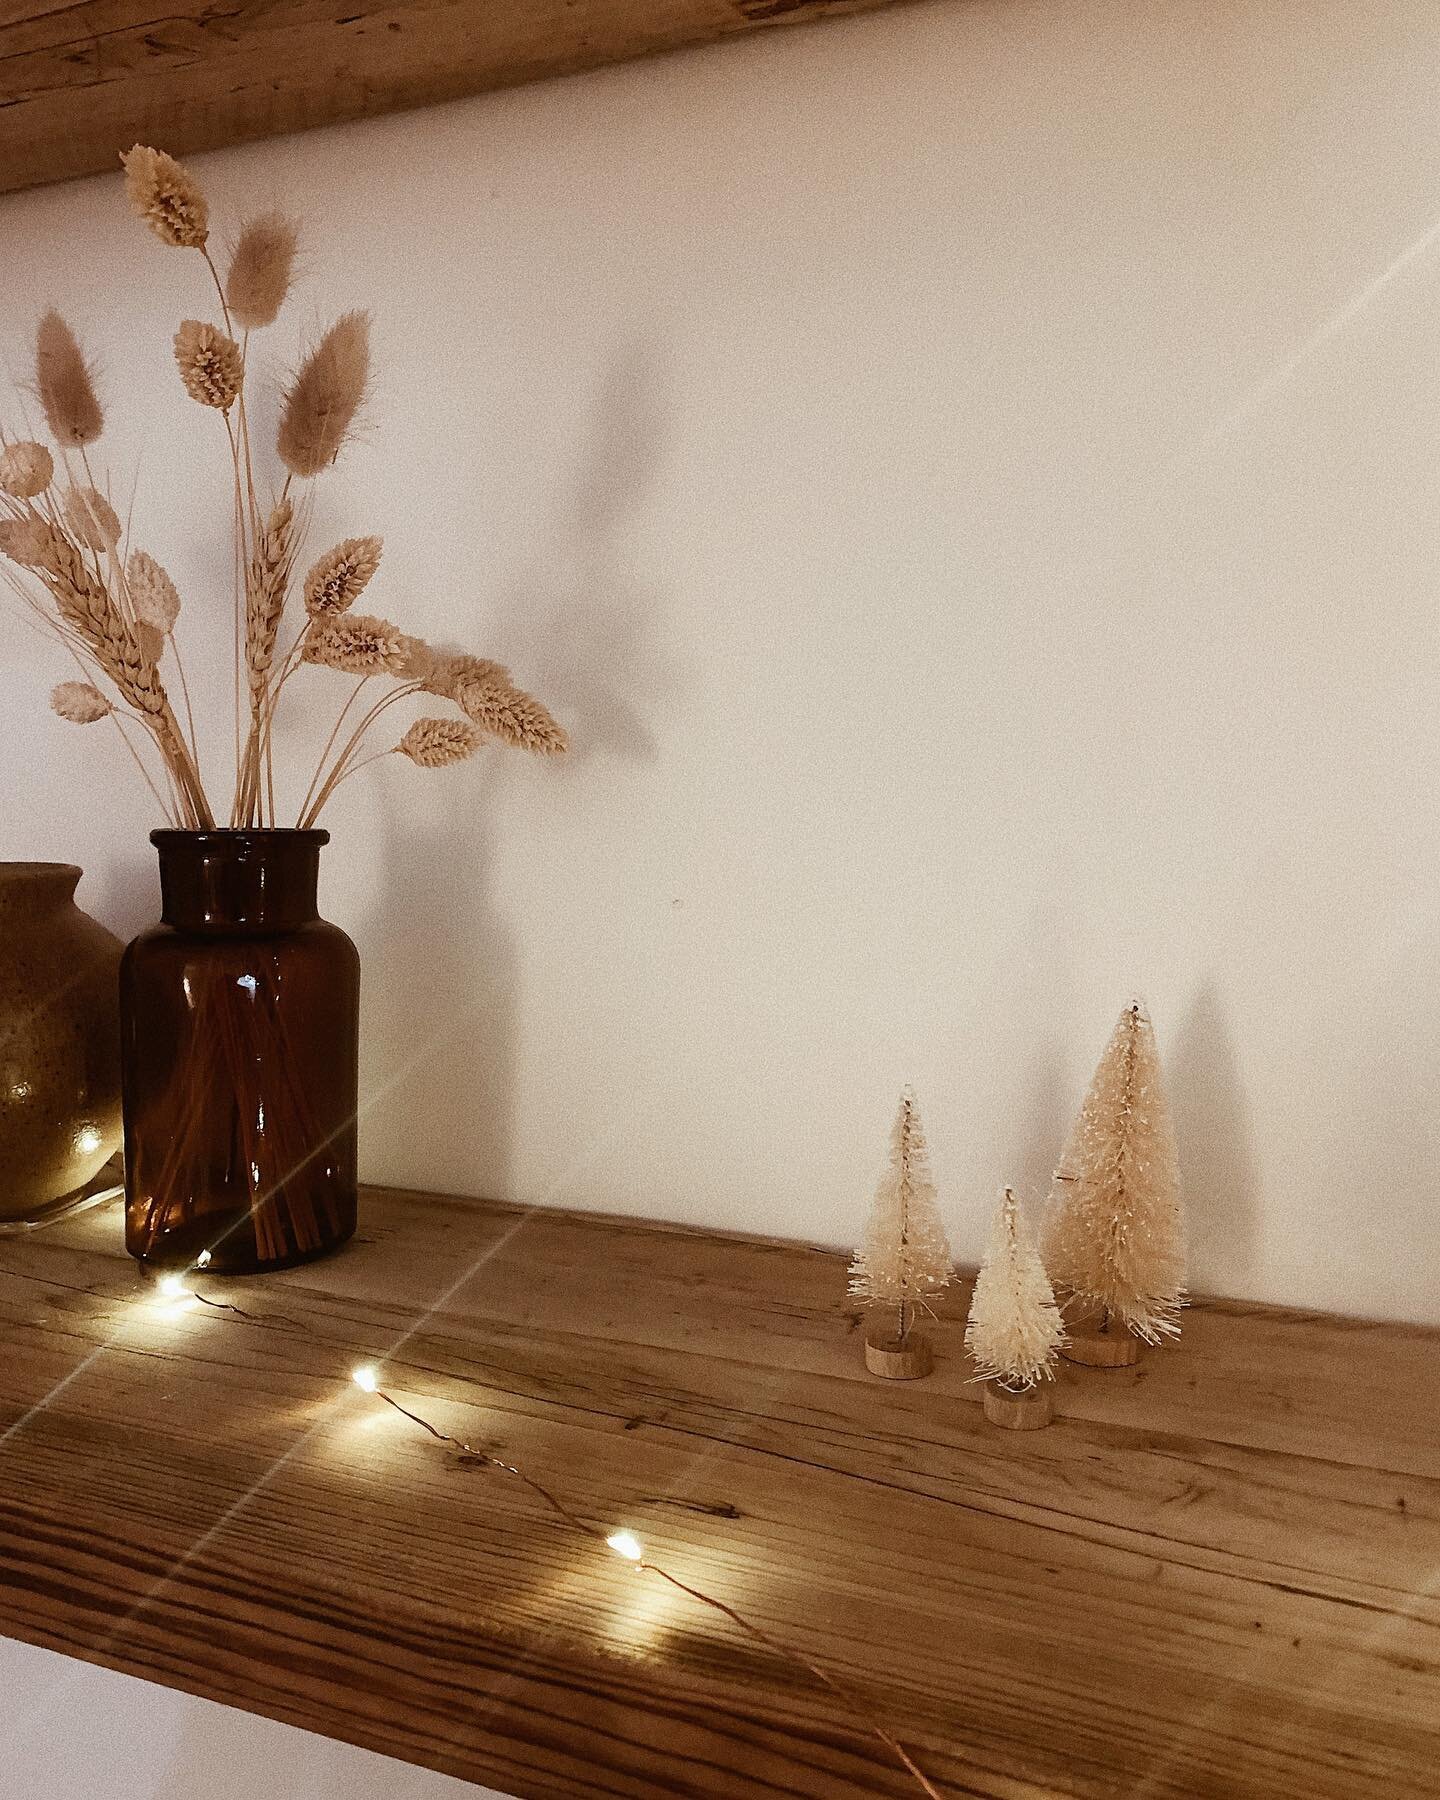 ⋒ fun fact about me: I love miniature stuff. Including these tiny Christmas trees...How adorable are they?😍